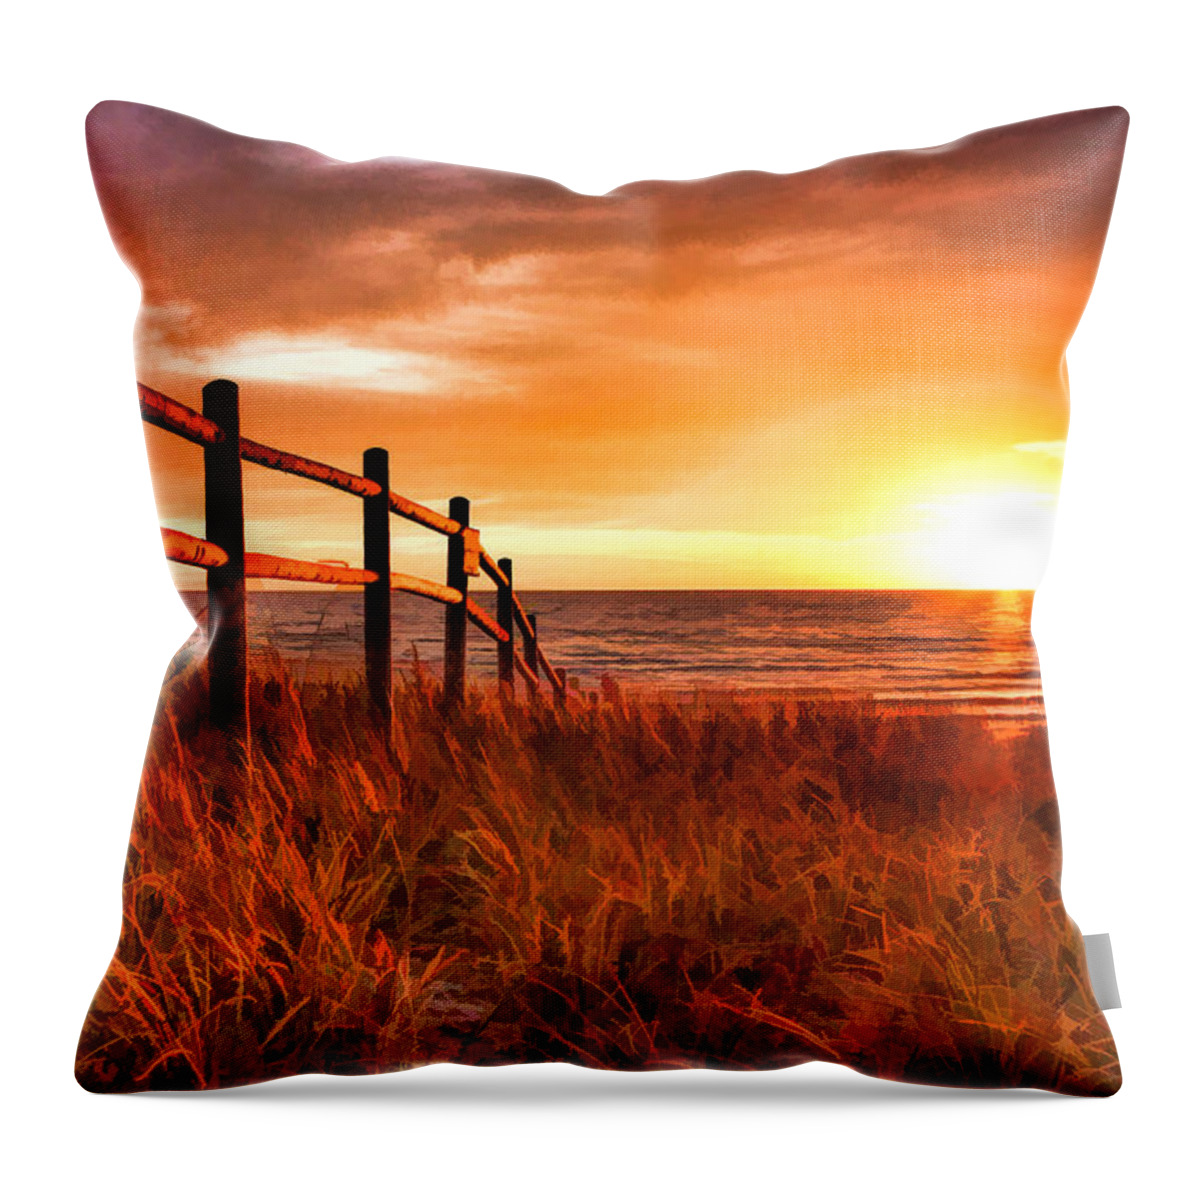 Door County Throw Pillow featuring the painting Door County Europe Bay Fence Sunrise by Christopher Arndt